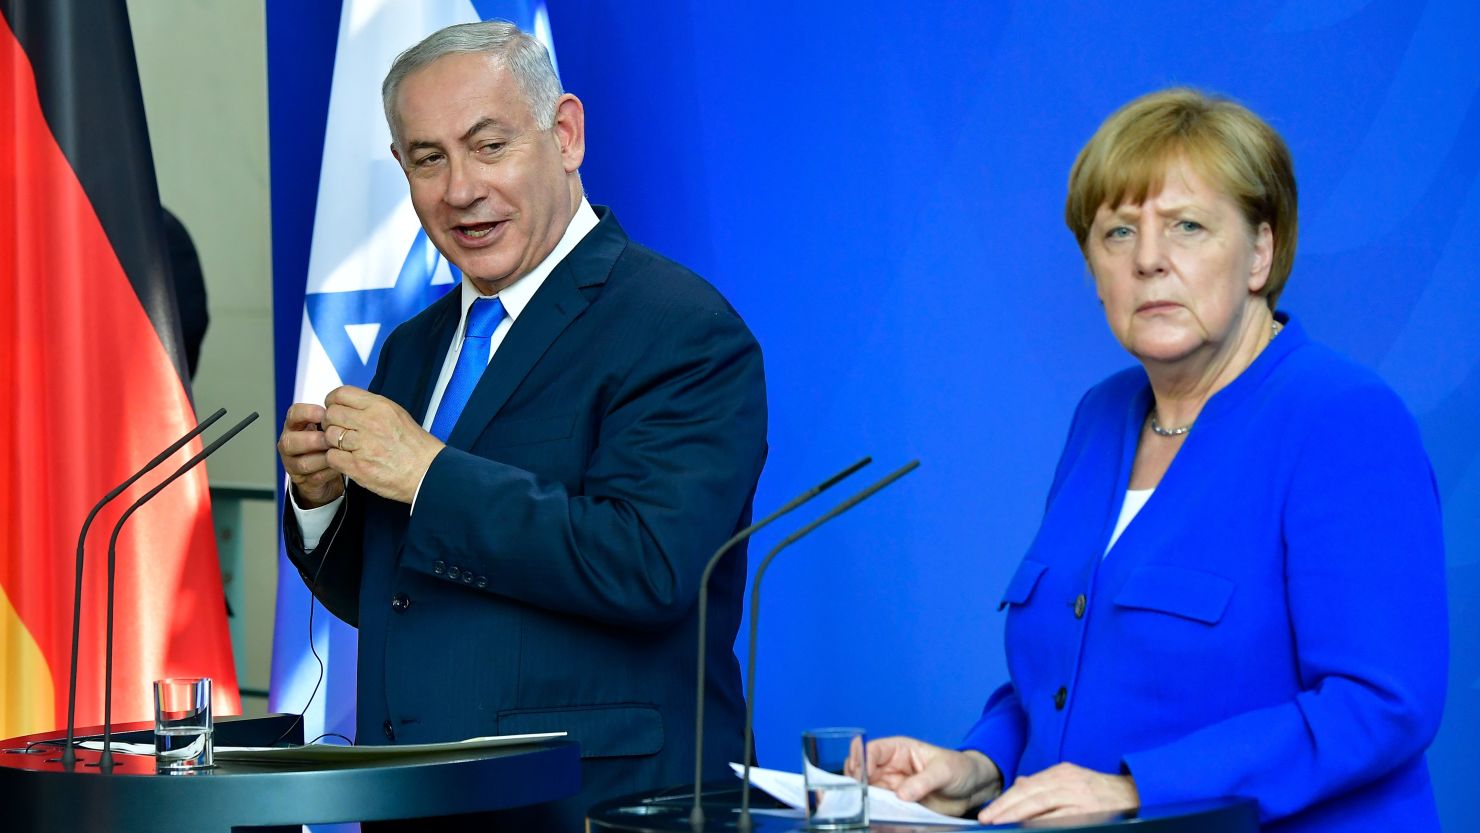 Netanyahu and Merkel address a news conference after meeting at the Chancellery in Berlin on Monday.